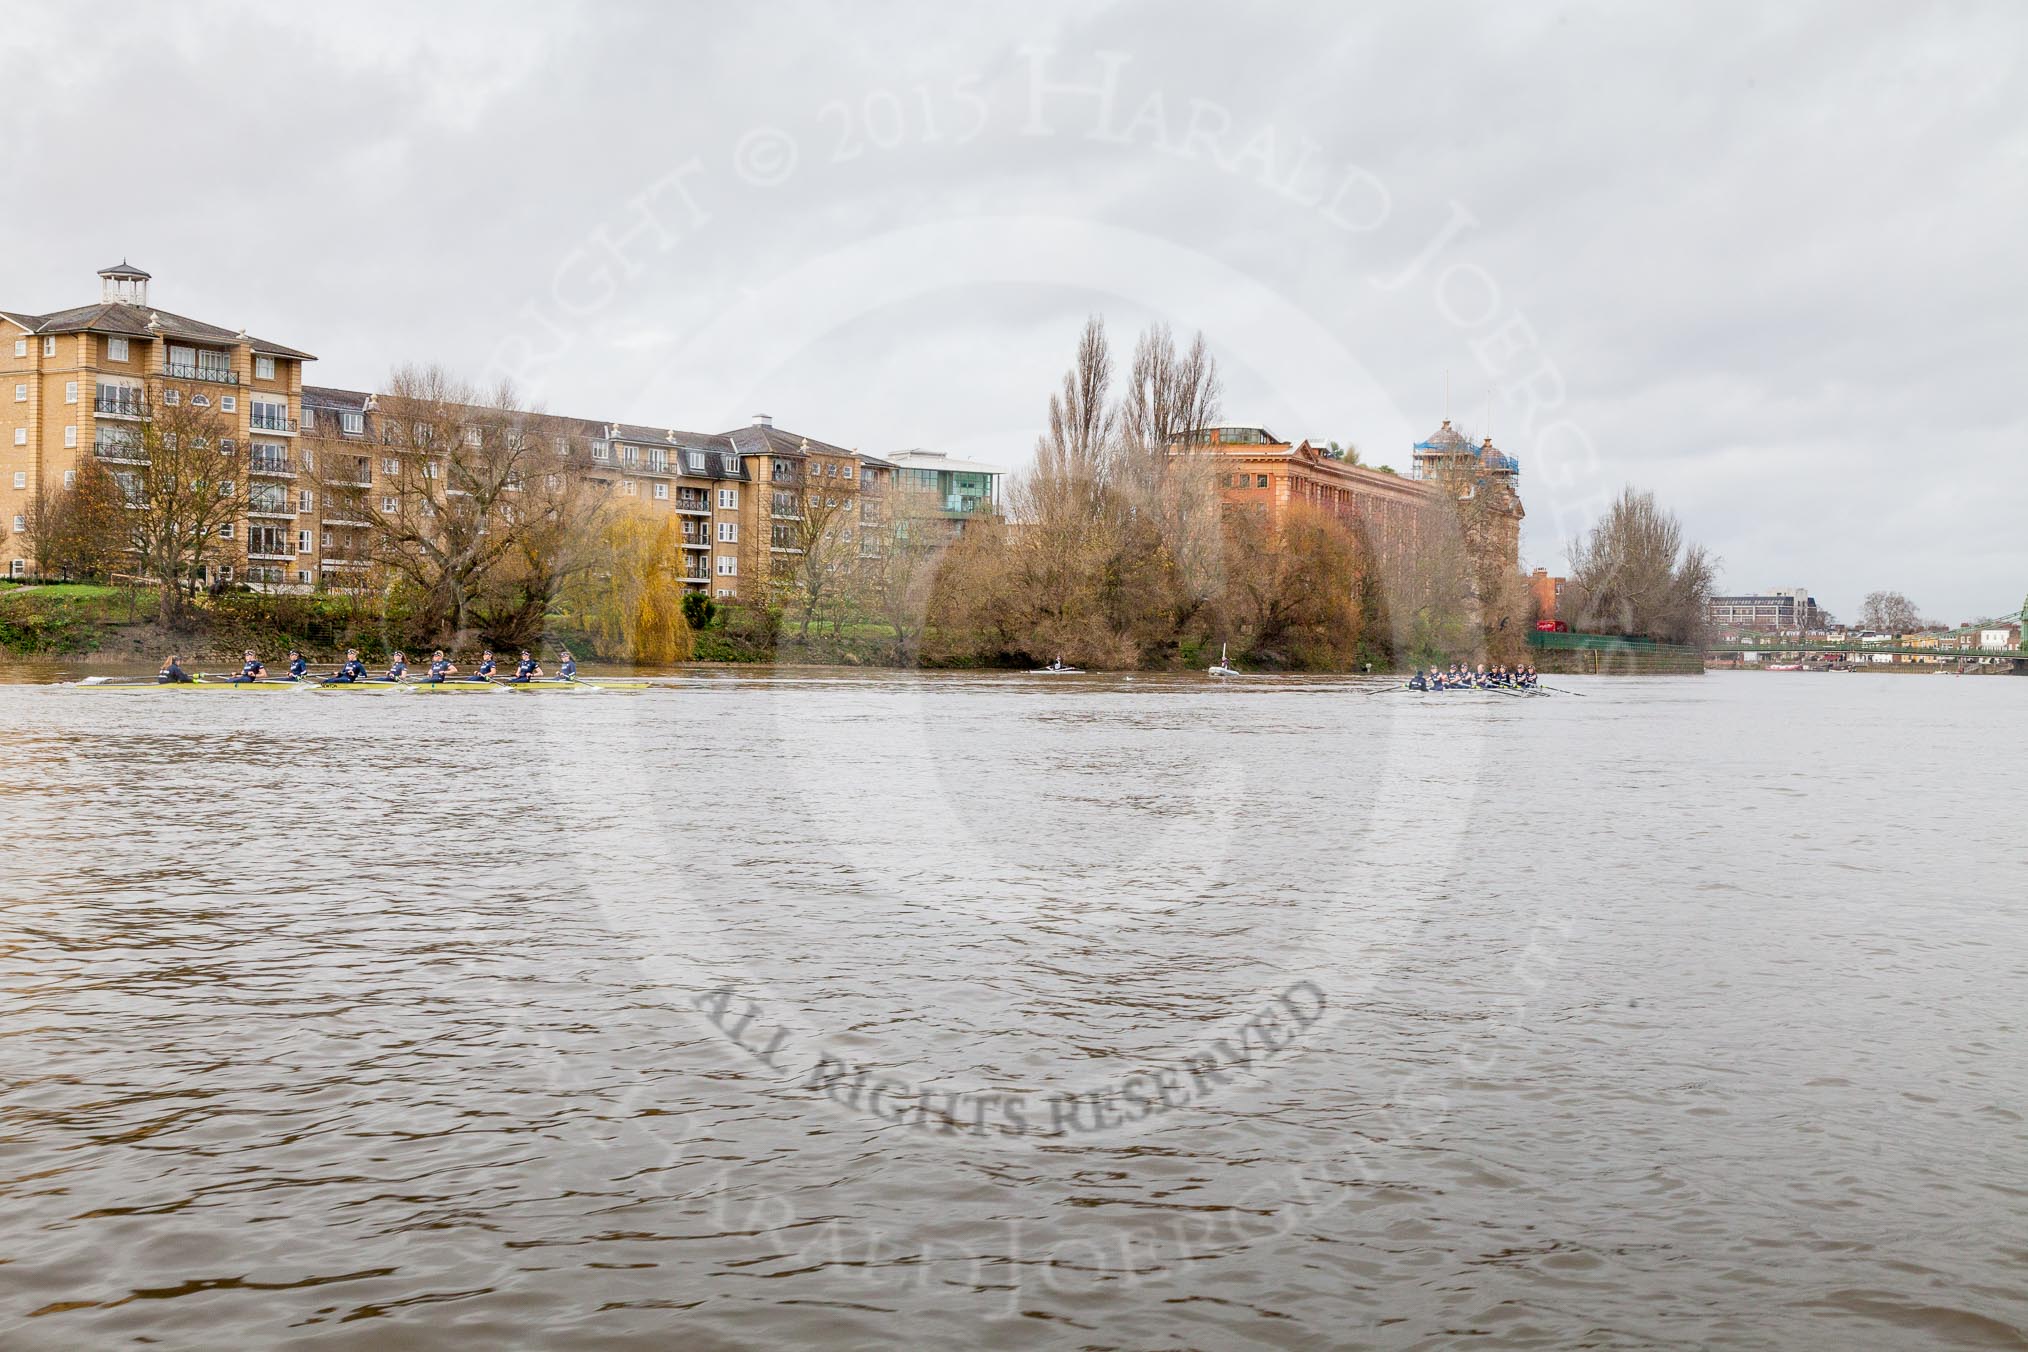 The Boat Race season 2016 - Women's Boat Race Trial Eights (OUWBC, Oxford): "Charybdis" and "Scylla" approaching Harrods Depository, "Scylla" is leading by several length.
River Thames between Putney Bridge and Mortlake,
London SW15,

United Kingdom,
on 10 December 2015 at 12:23, image #198